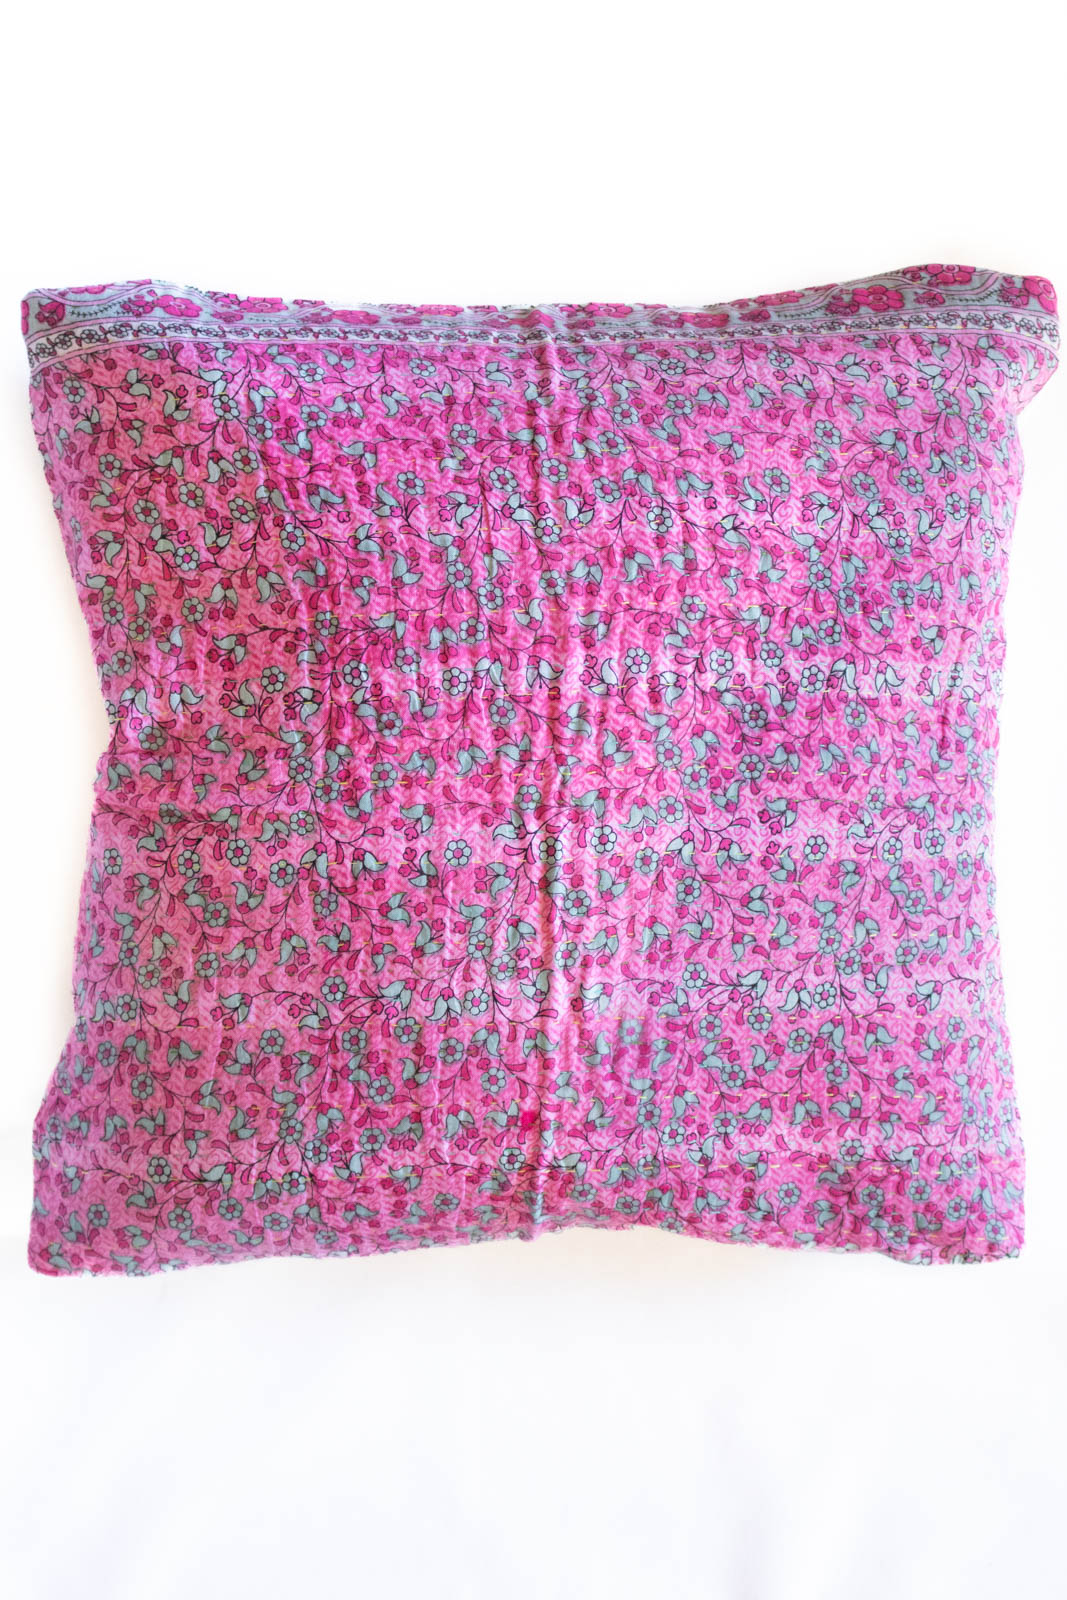 Restore no. 4 Kantha Pillow Cover